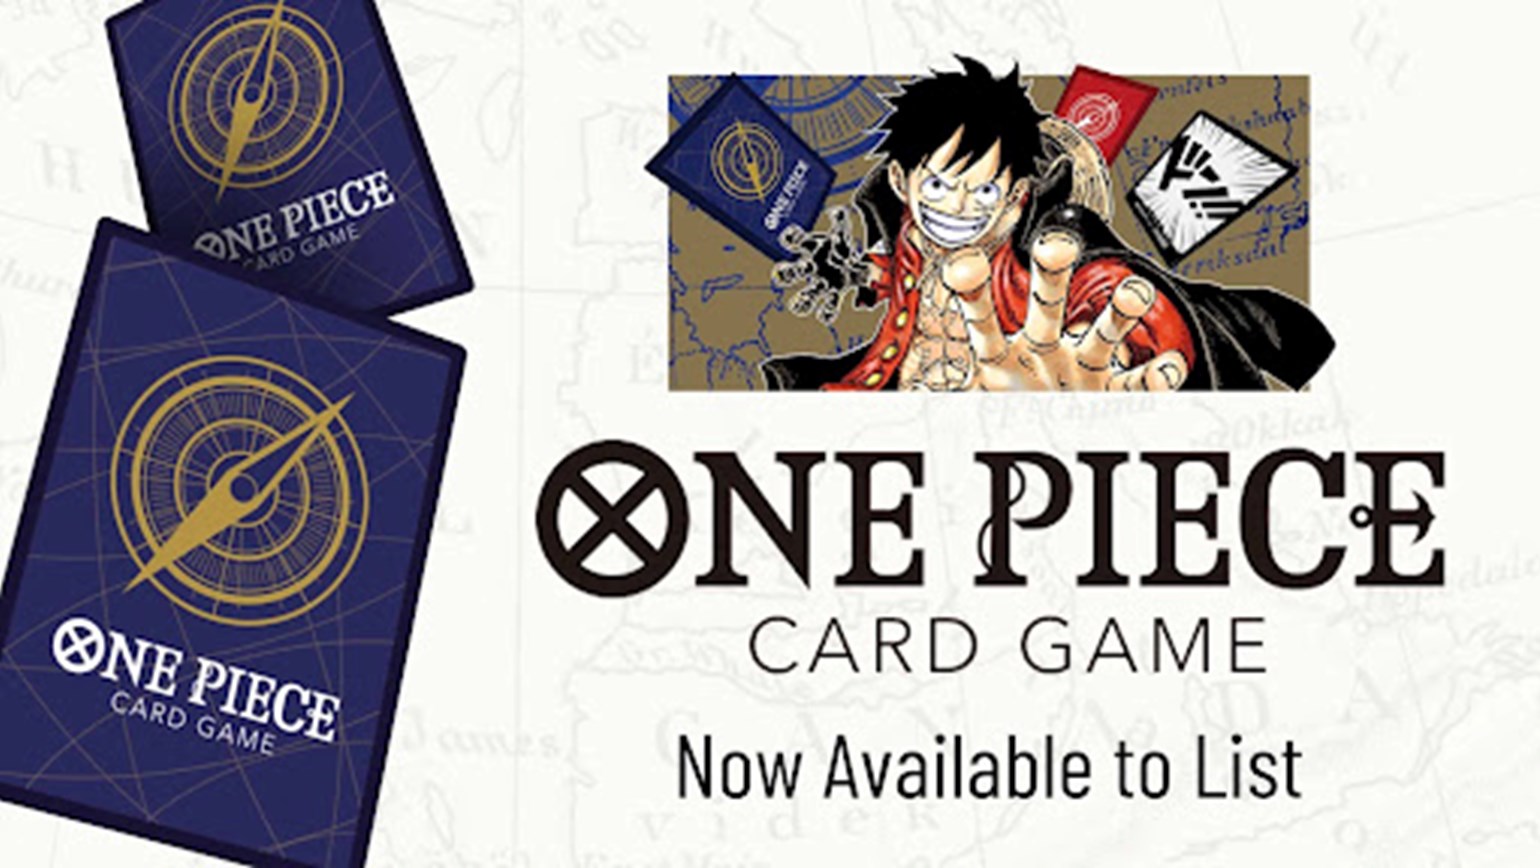 One Piece Card Game Coming Soon to TCGplayer!